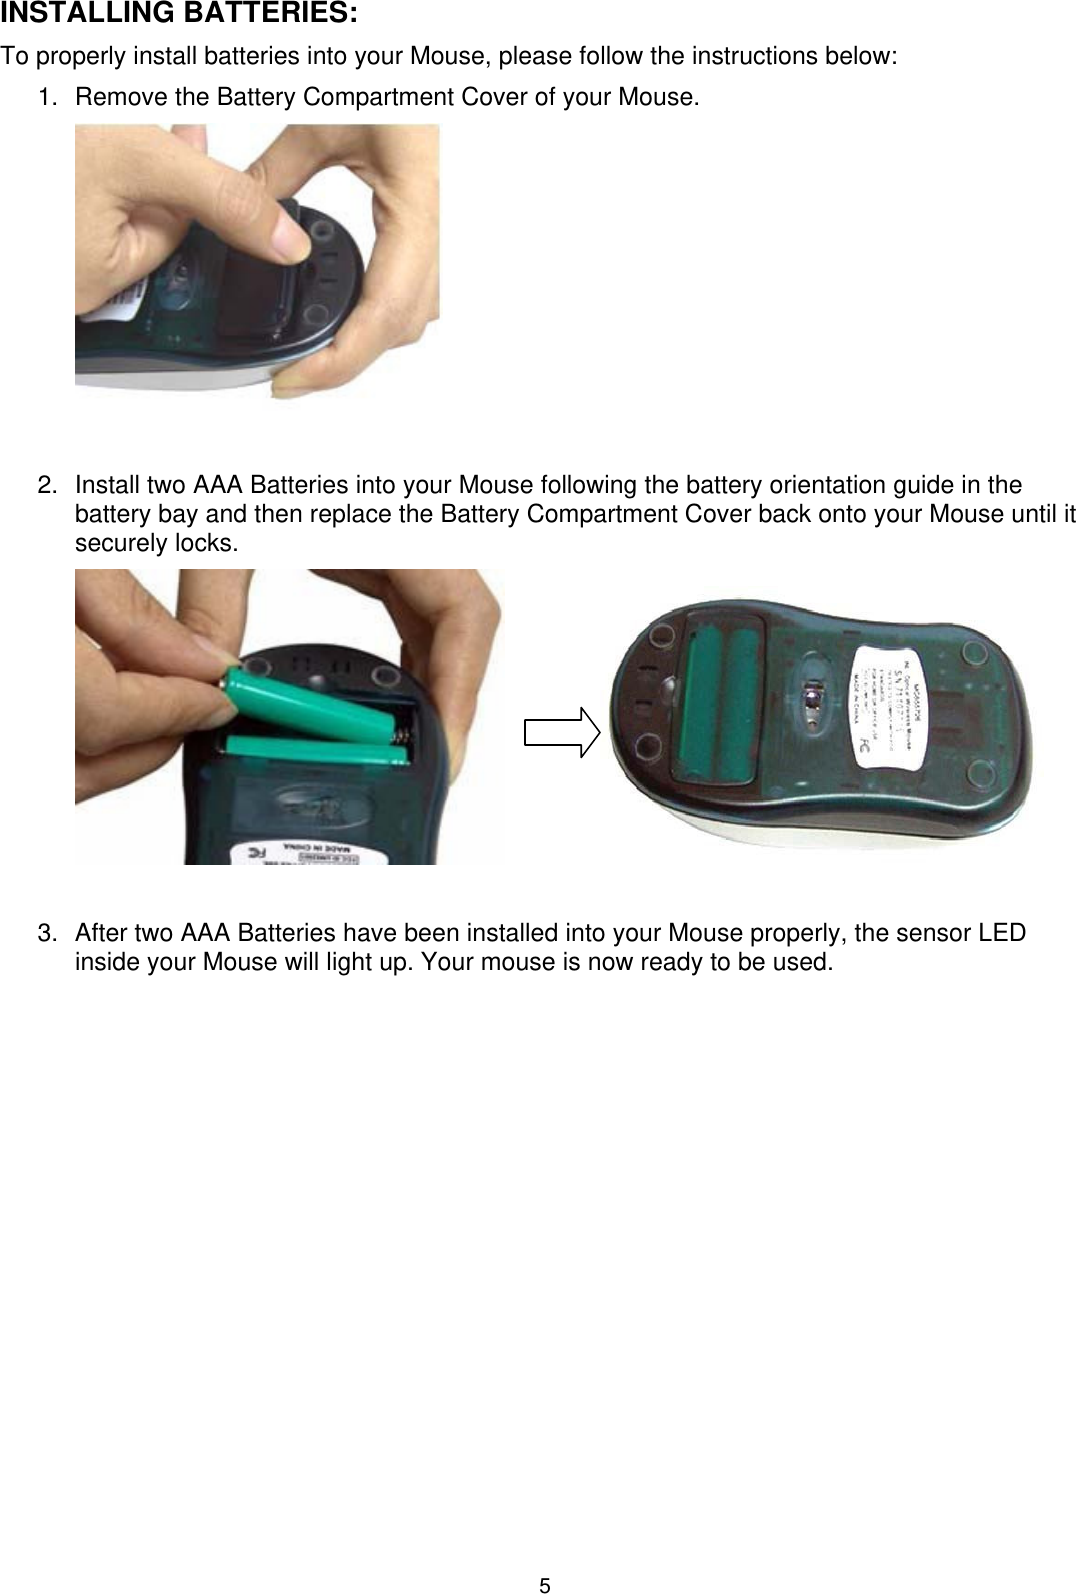 5 INSTALLING BATTERIES: To properly install batteries into your Mouse, please follow the instructions below: 1.  Remove the Battery Compartment Cover of your Mouse.   2.  Install two AAA Batteries into your Mouse following the battery orientation guide in the battery bay and then replace the Battery Compartment Cover back onto your Mouse until it securely locks.      3.  After two AAA Batteries have been installed into your Mouse properly, the sensor LED inside your Mouse will light up. Your mouse is now ready to be used.    